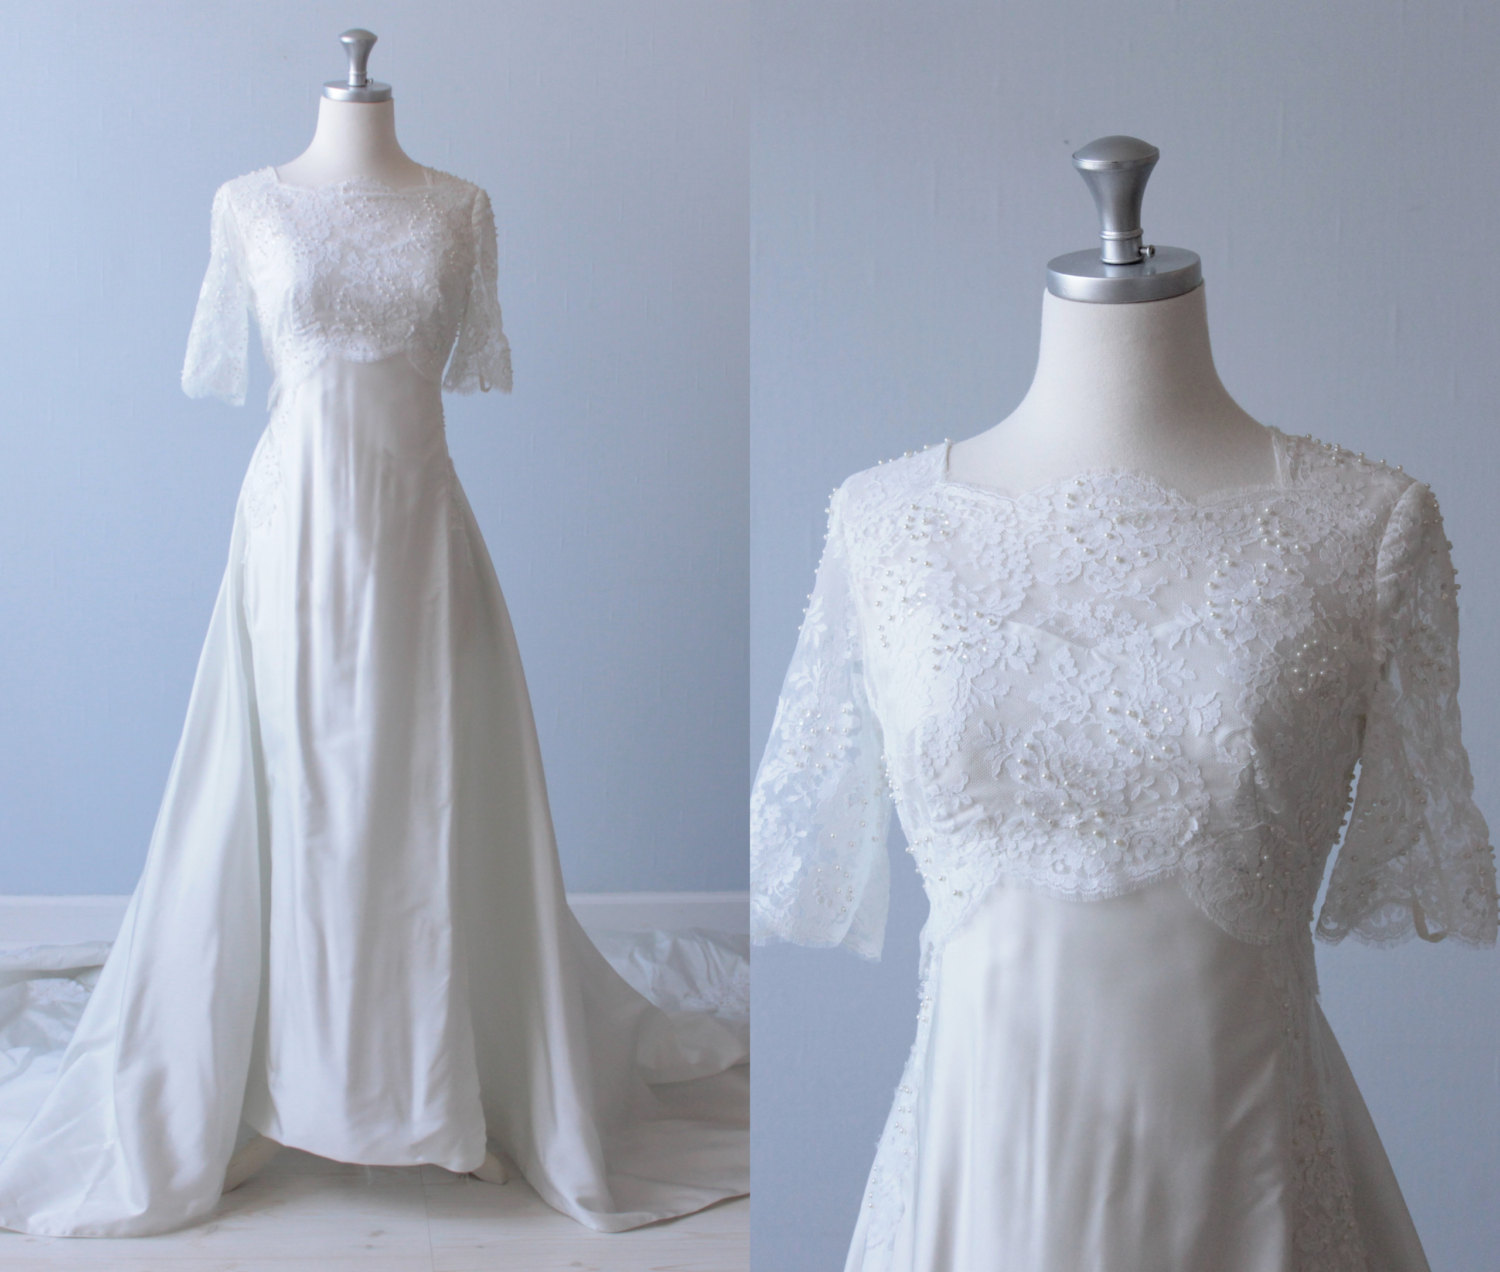 1960s Wedding Dress from The Vintage Mistress